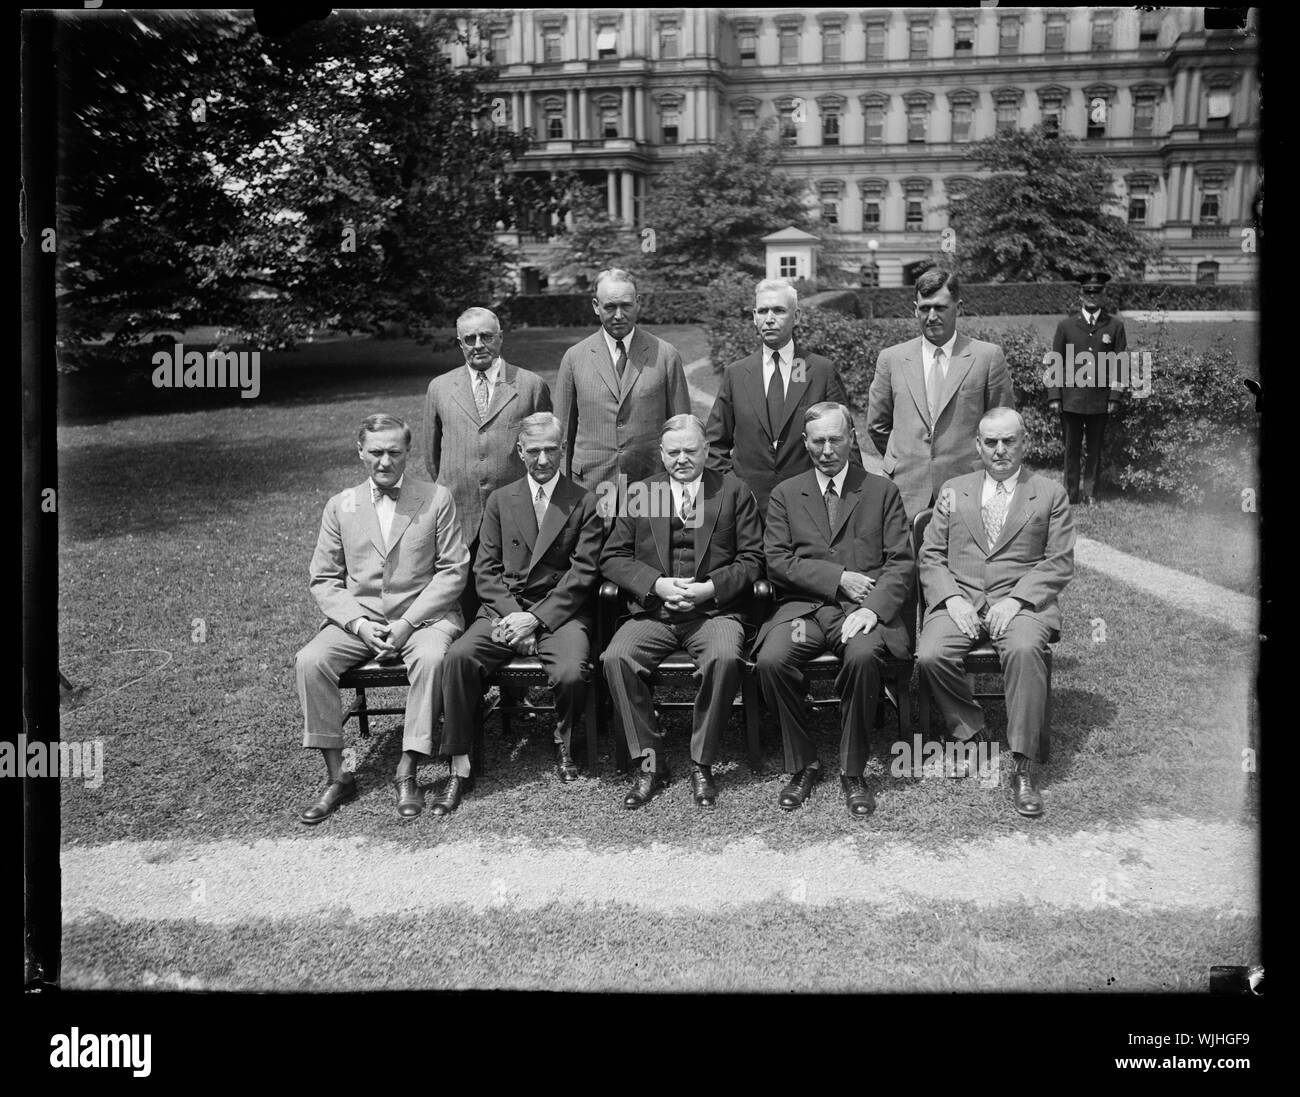 Herbert Hoover and group; State, War, and Navy building in background, Washington, D.C. Stock Photo